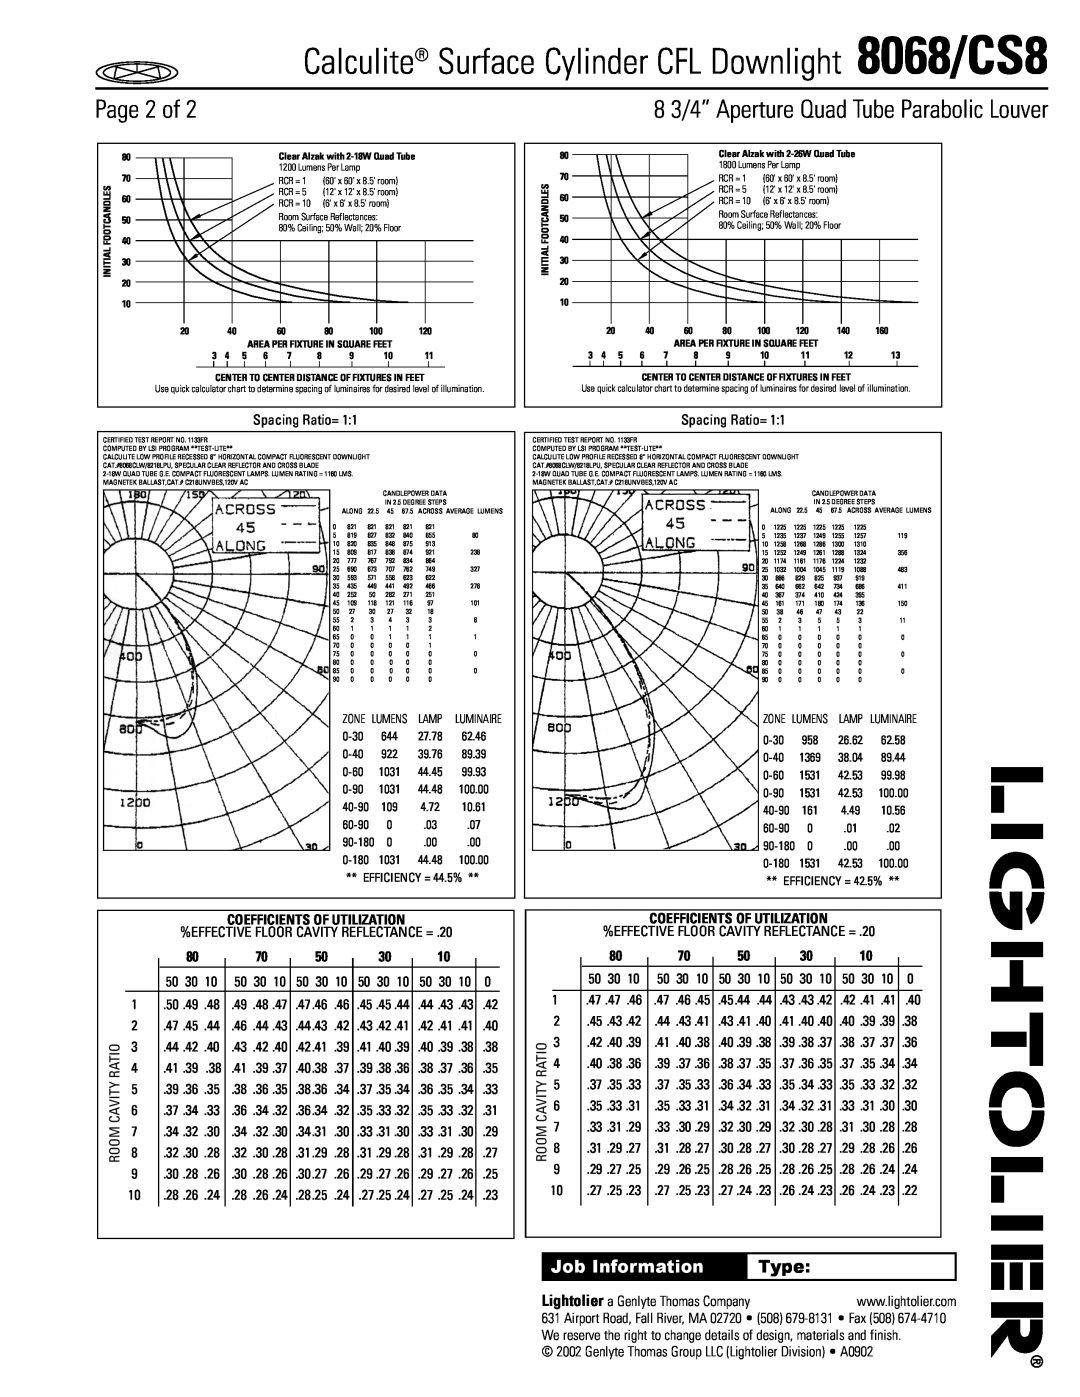 Lightolier 8068-CS8 specifications Calculite Surface Cylinder CFL Downlight 8068/CS8, Page 2 of, Job Information, Type 